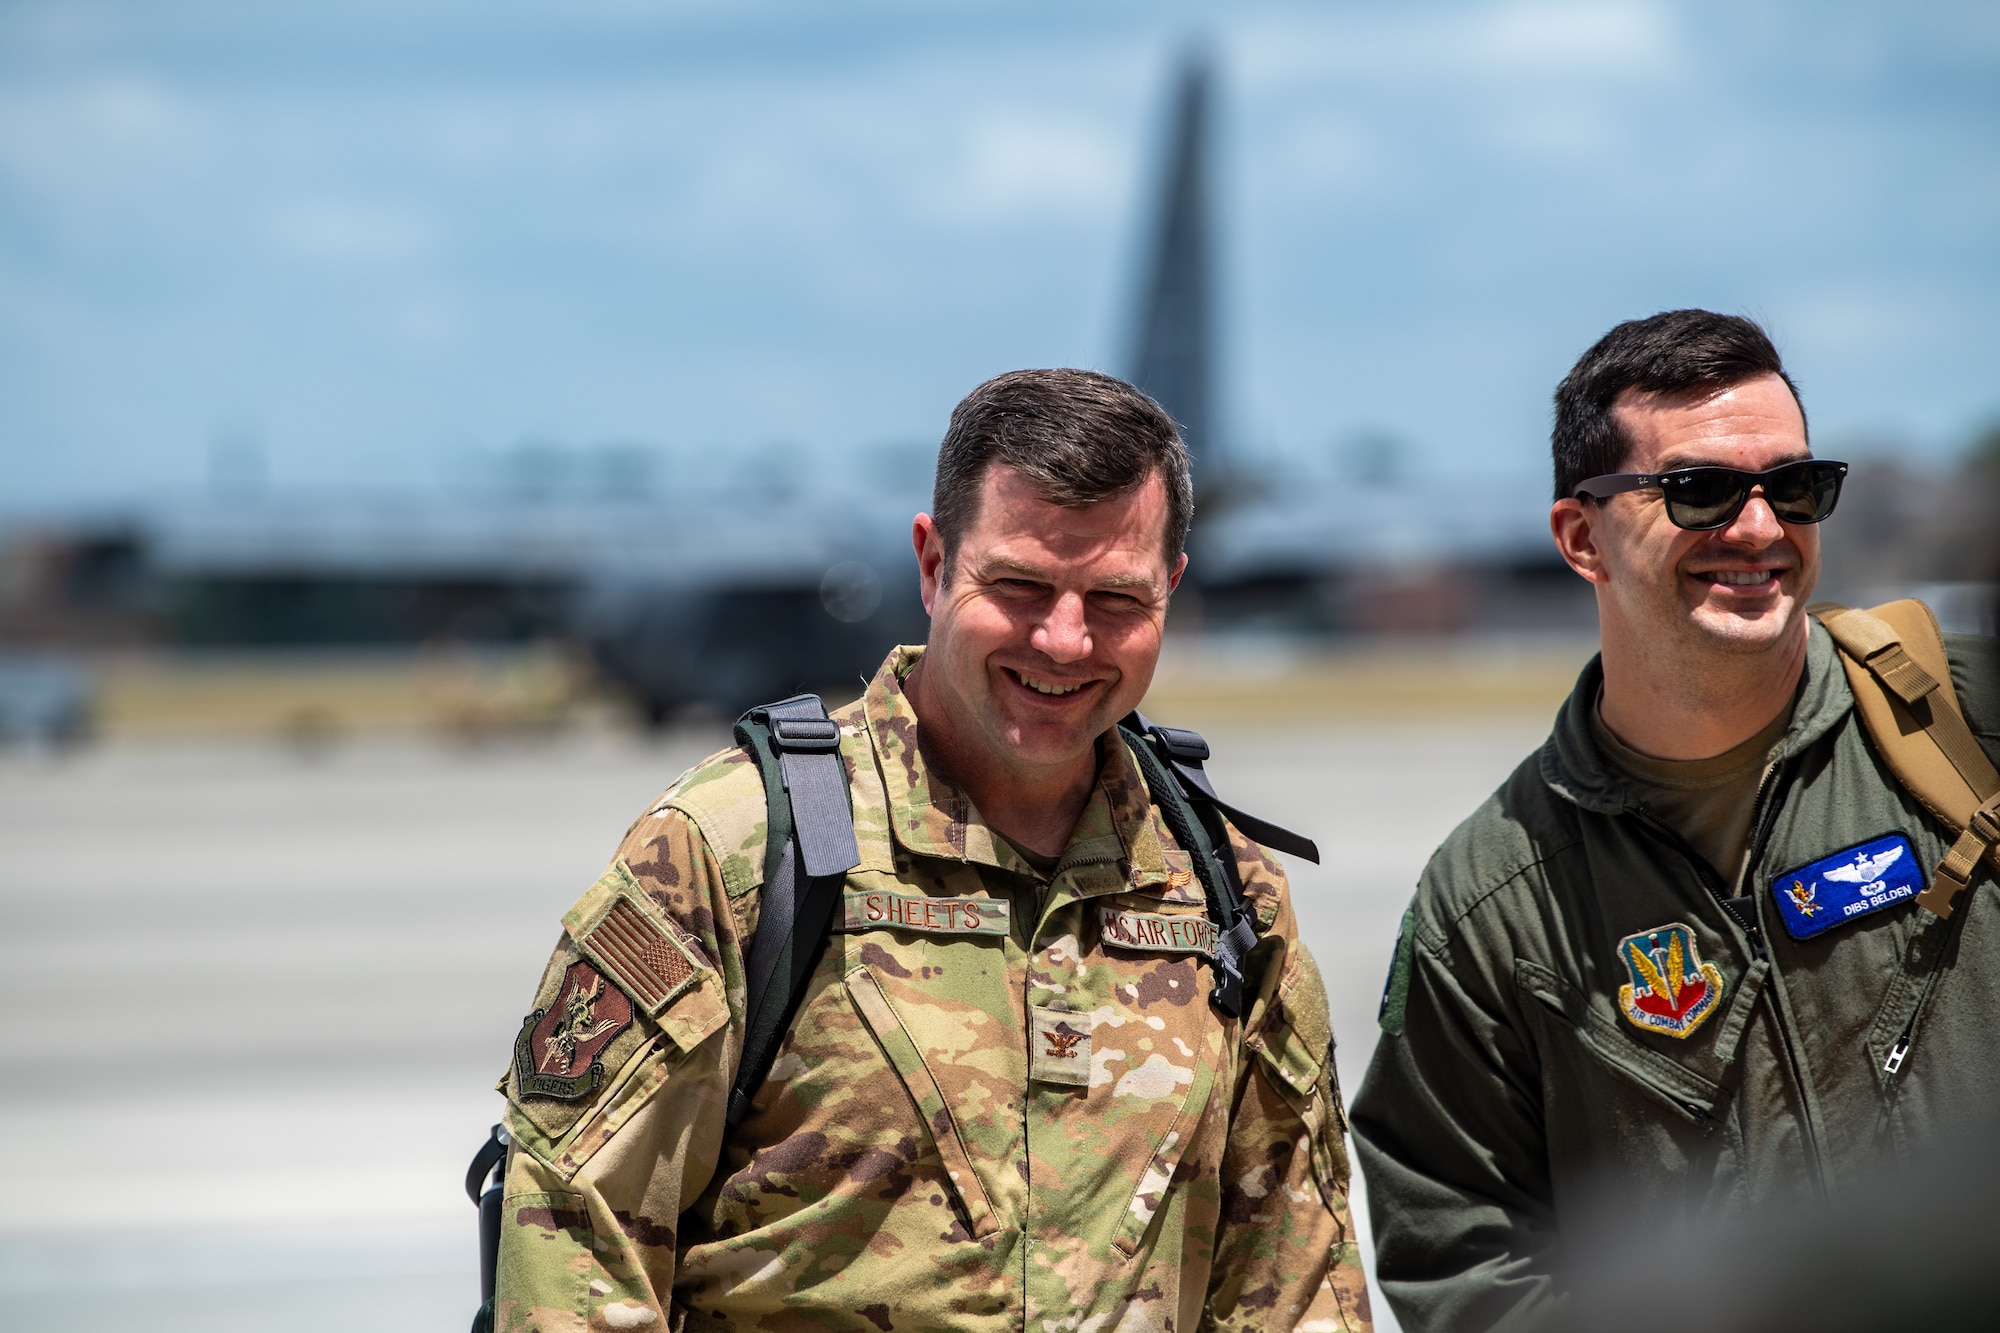 U.S. Air Force Col. Paul Sheets, 23rd Wing commander arrives to the main operating base during Exercise Ready Tiger 24-1 at Savannah Air National Guard Base in Savannah, Georgia, April 10, 2024. During Ready Tiger 24-1, the 23rd Wing will be evaluated on the integration of Air Force Force Generation principles such as Agile Combat Employment, integrated combat turns, forward aerial refueling points, multi-capable Airmen, and combat search and rescue capabilities. (U.S. Air Force photo by Senior Airman Courtney Sebastianelli)